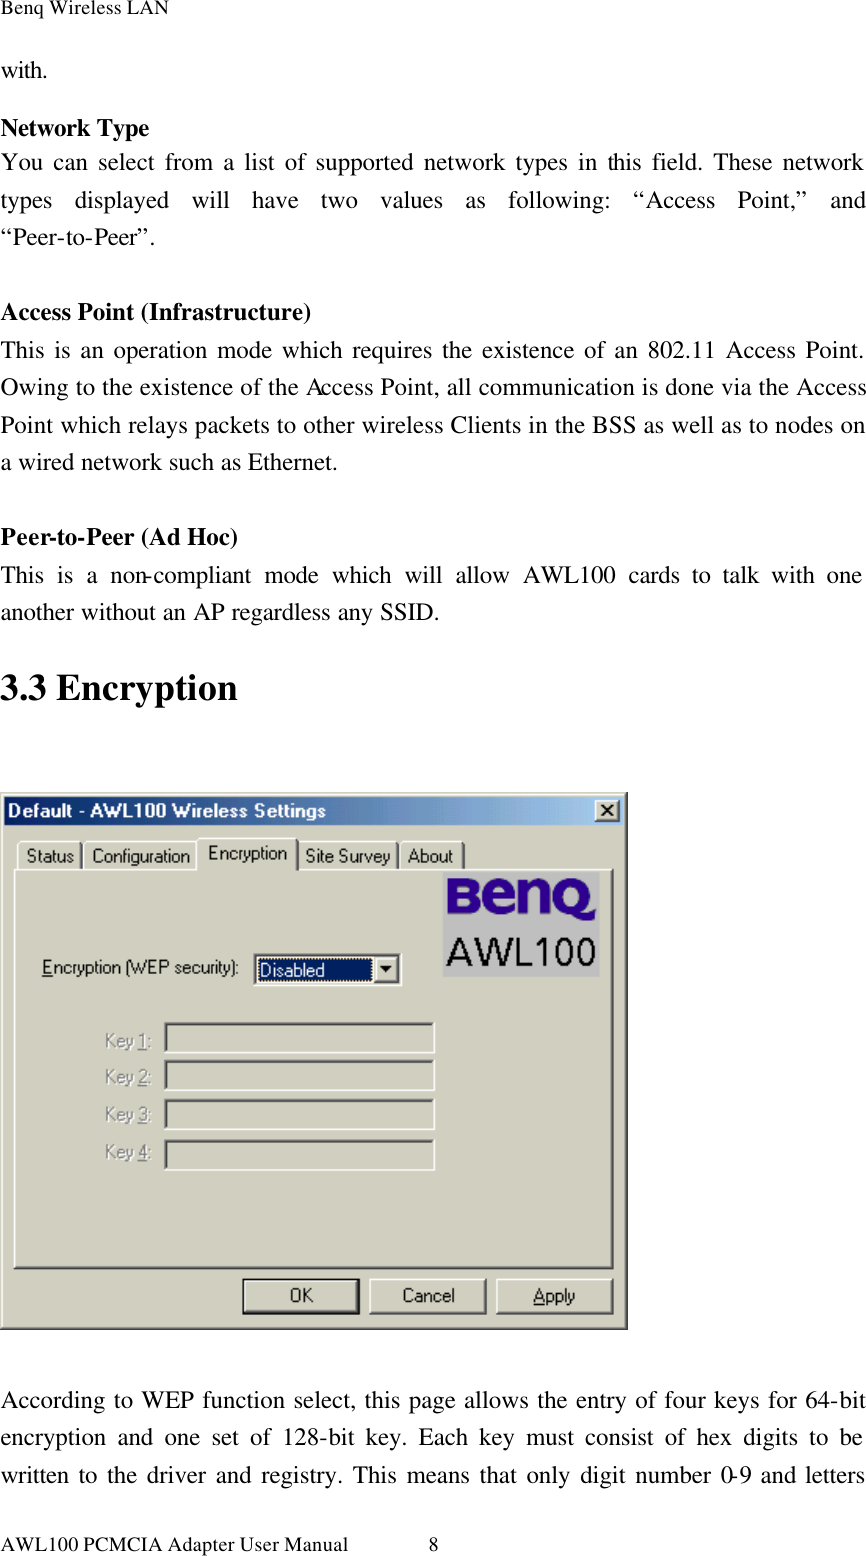 Benq Wireless LAN AWL100 PCMCIA Adapter User Manual 8with.  Network Type You can select from a list of supported network types in this field. These network types displayed will have two values as following: “Access Point,” and “Peer-to-Peer”.  Access Point (Infrastructure) This is an operation mode which requires the existence of an 802.11 Access Point. Owing to the existence of the Access Point, all communication is done via the Access Point which relays packets to other wireless Clients in the BSS as well as to nodes on a wired network such as Ethernet.  Peer-to-Peer (Ad Hoc) This is a non-compliant mode which will allow AWL100 cards to talk with one another without an AP regardless any SSID. 3.3 Encryption    According to WEP function select, this page allows the entry of four keys for 64-bit encryption and one set of 128-bit key. Each key must consist of hex digits to be written to the driver and registry. This means that only digit number 0-9 and letters 